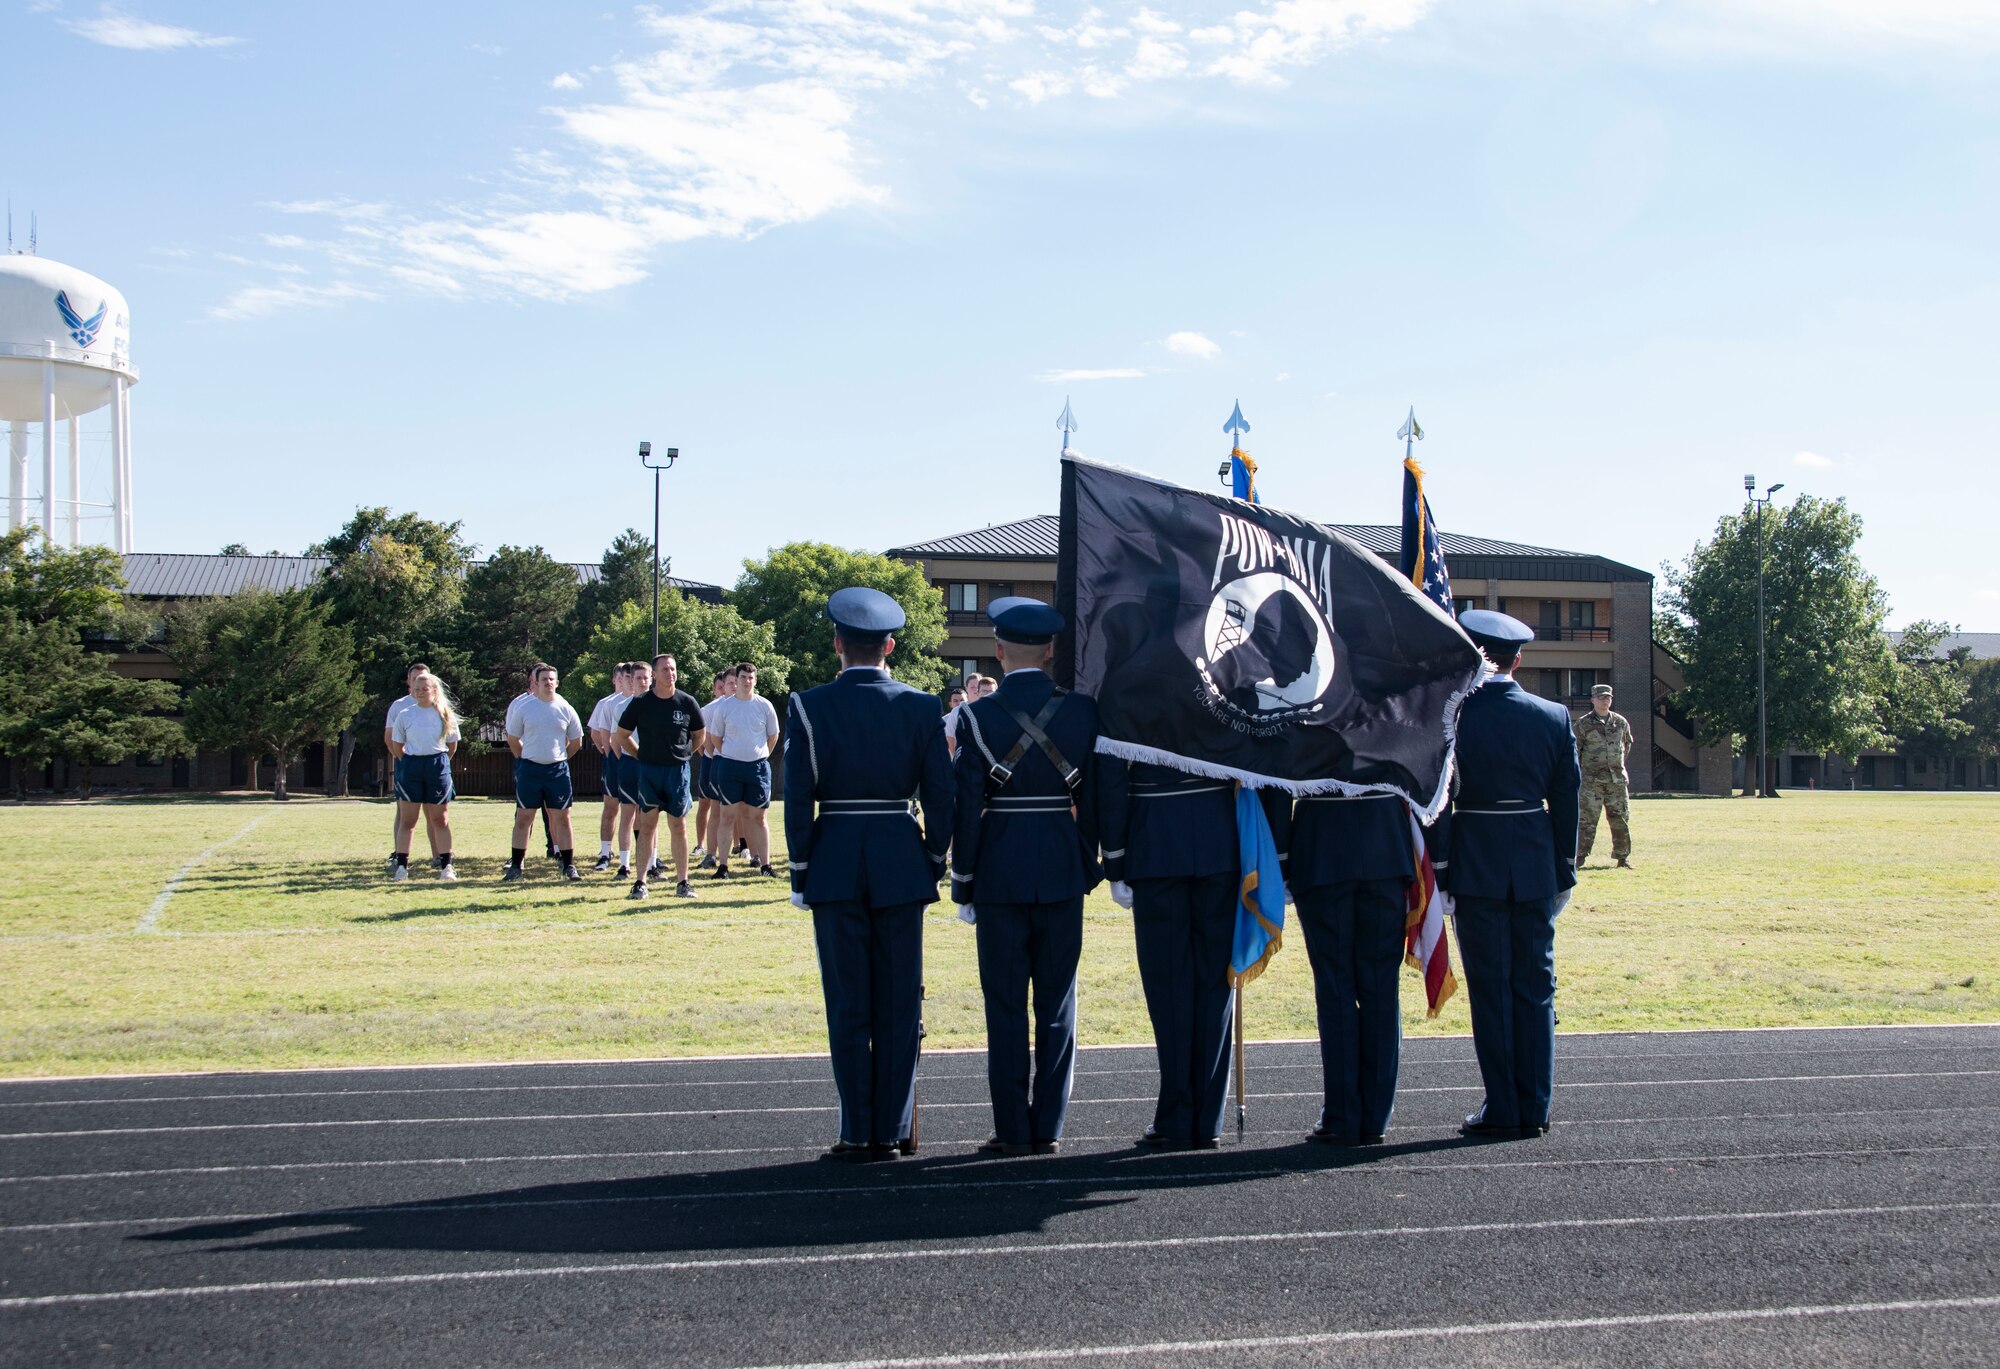 U.S. Air Force Members of the Altus Blue Knights Honor Guard Team assigned to the 97th Air Mobility Wing await the start of the 24-hour POW/MIA remembrance run Sept. 19, 2019, at Altus Air Force Base, Okla. The run took place from reveille on Sept. 19, to reveille on Sept. 20. (U.S. Air Force photo by Senior Airman Cody Dowell)